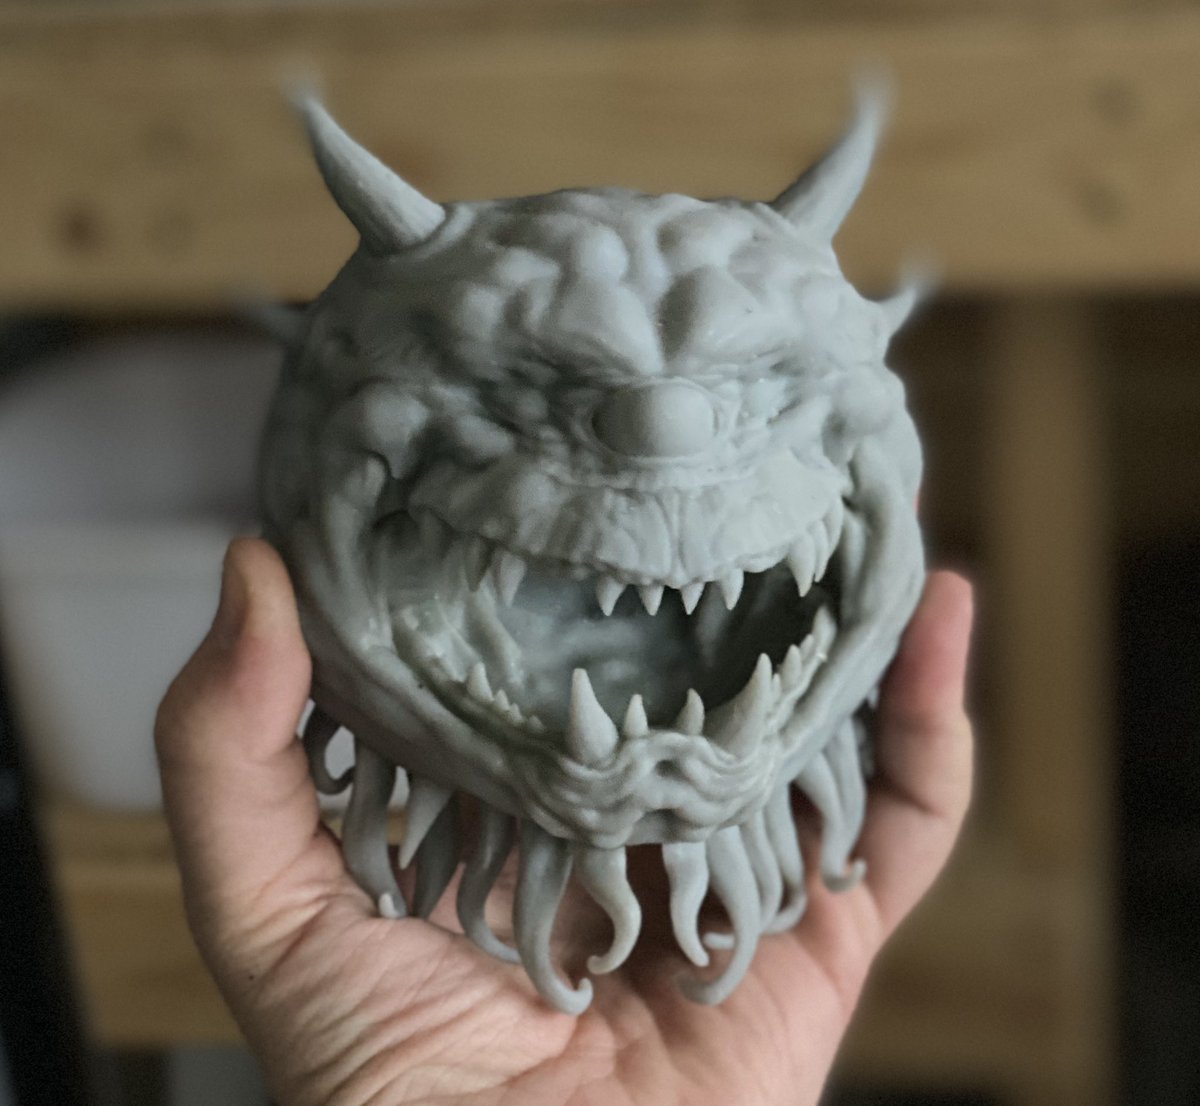 Got that Fulgore test printing …constantly spitting out warbat prototypes to get him locked in as well for the shop ….on that note , does anyone want a Beholder or Cacodemon?! Had them last year at Monsterpalooza and they were a hit! Gauging what to produce first for the launch